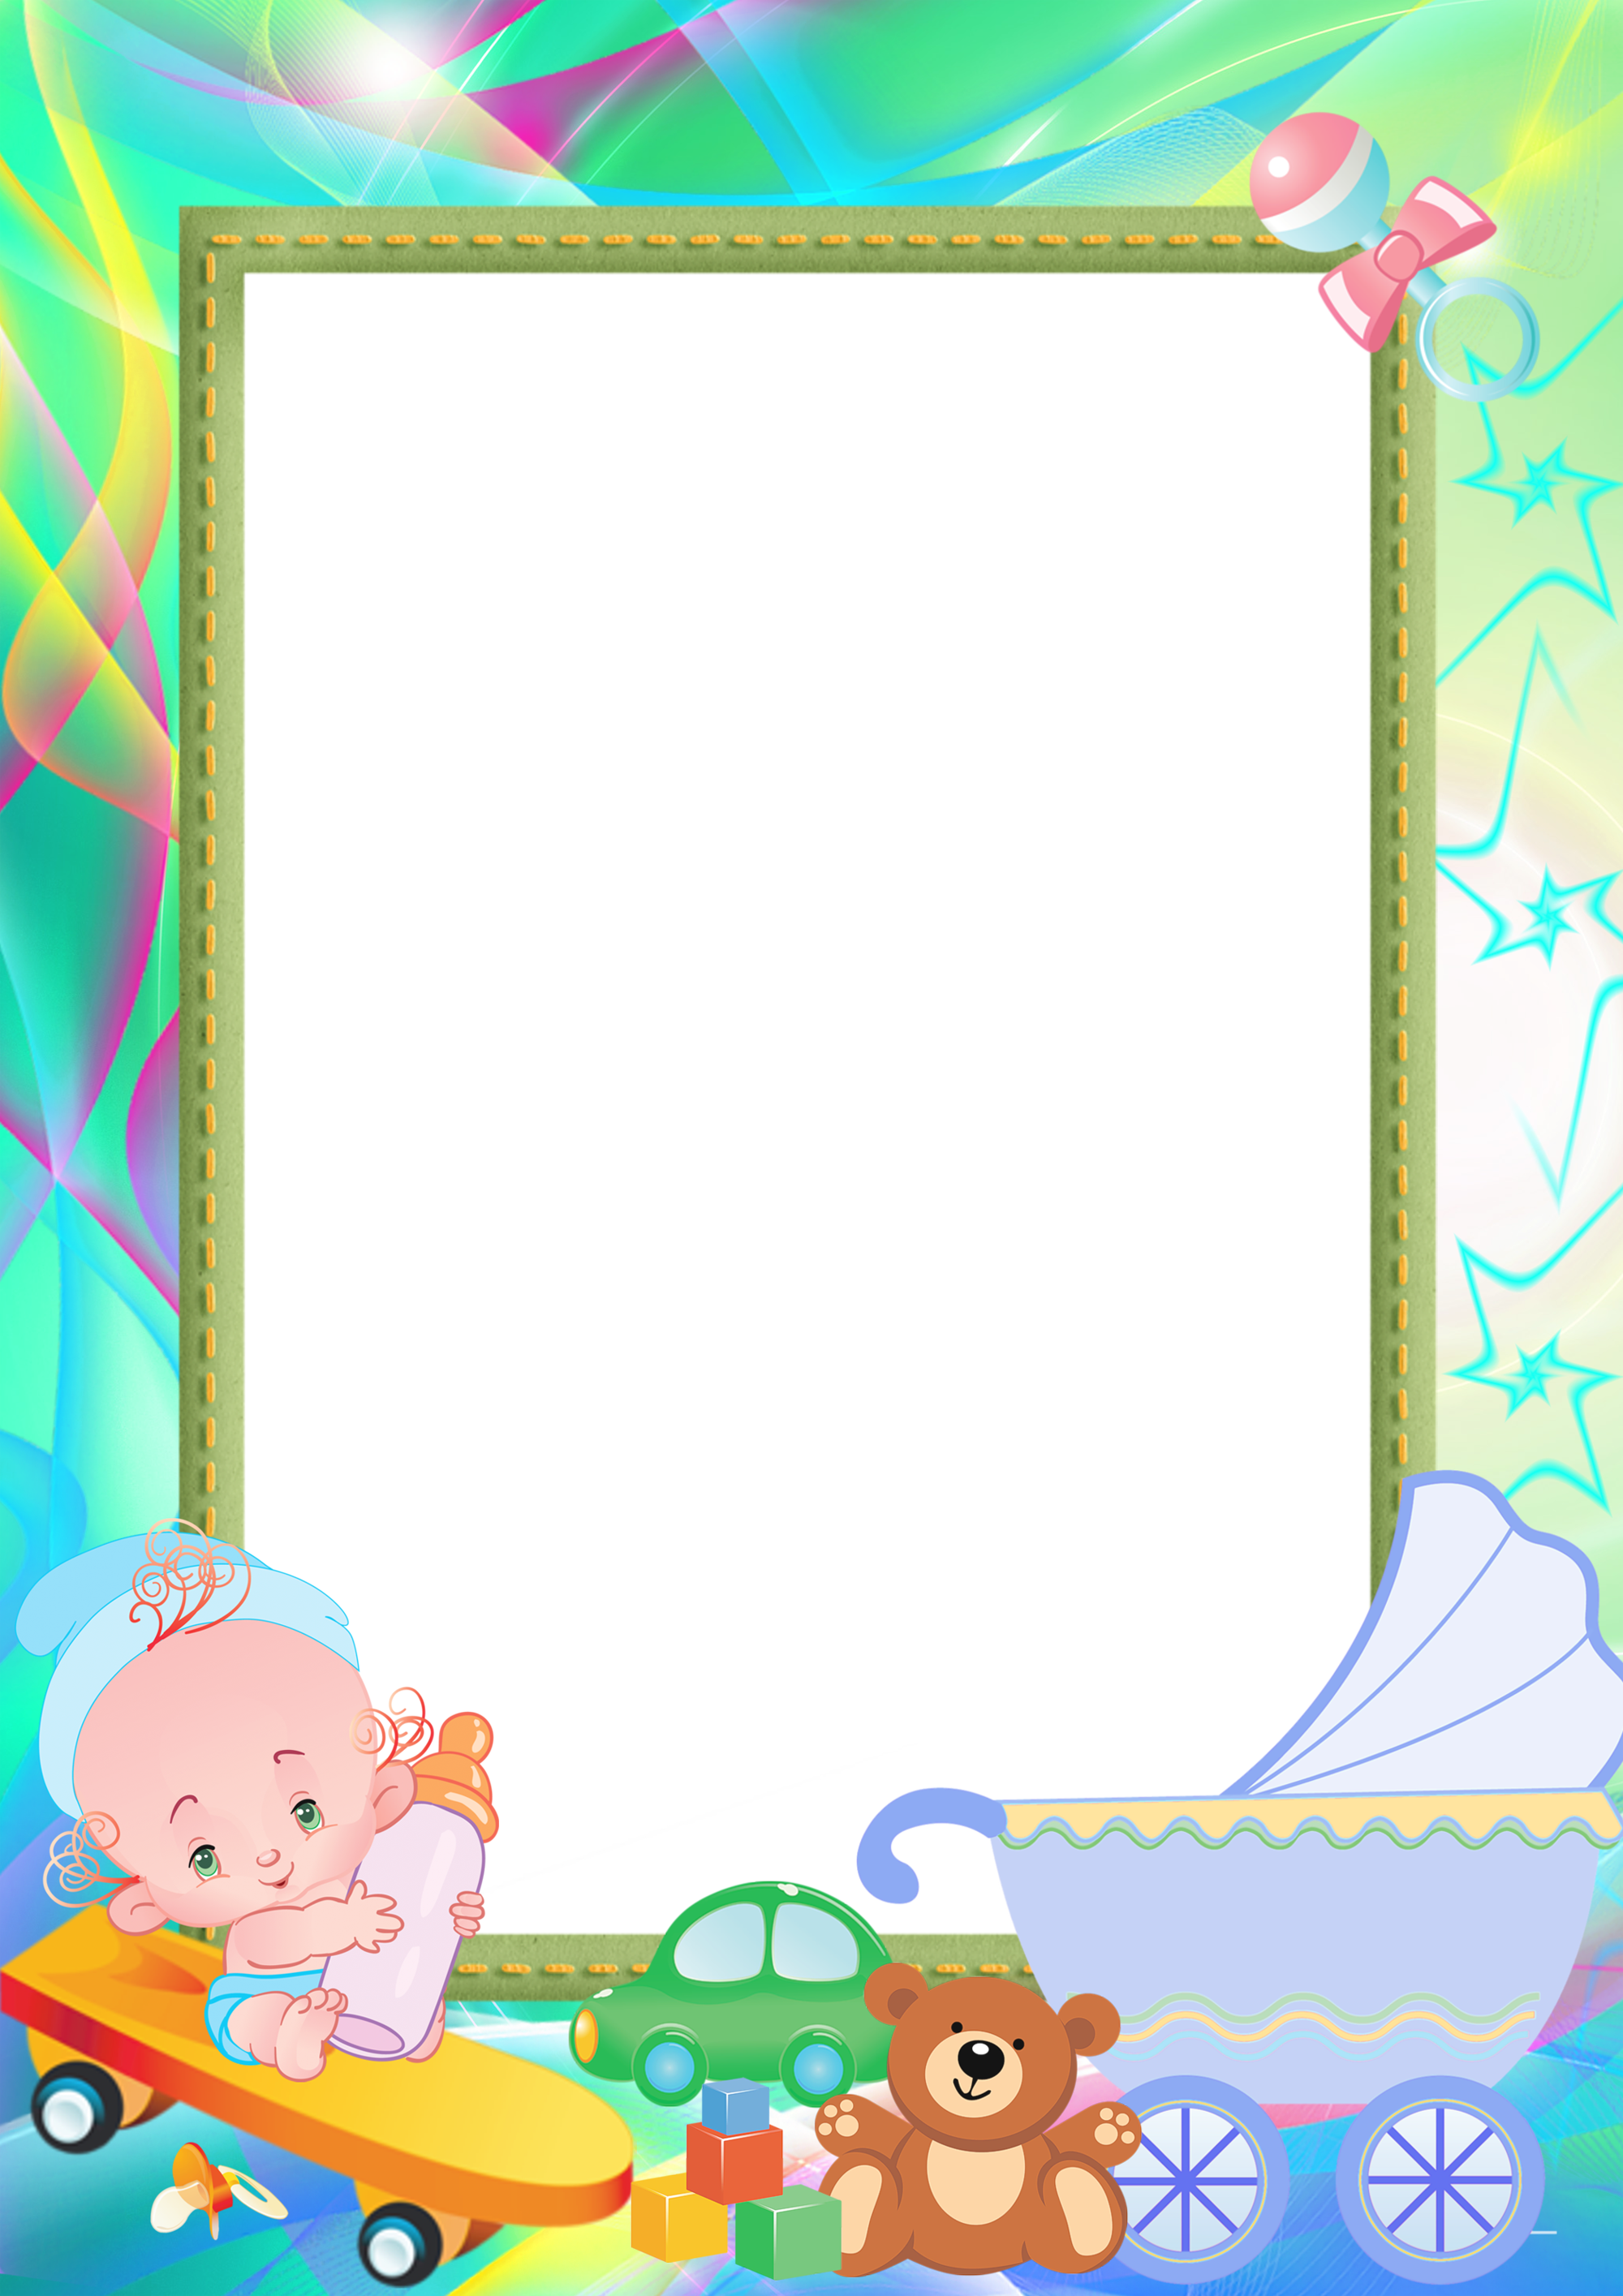 Baby photo babies pinterest. Strawberries clipart frame